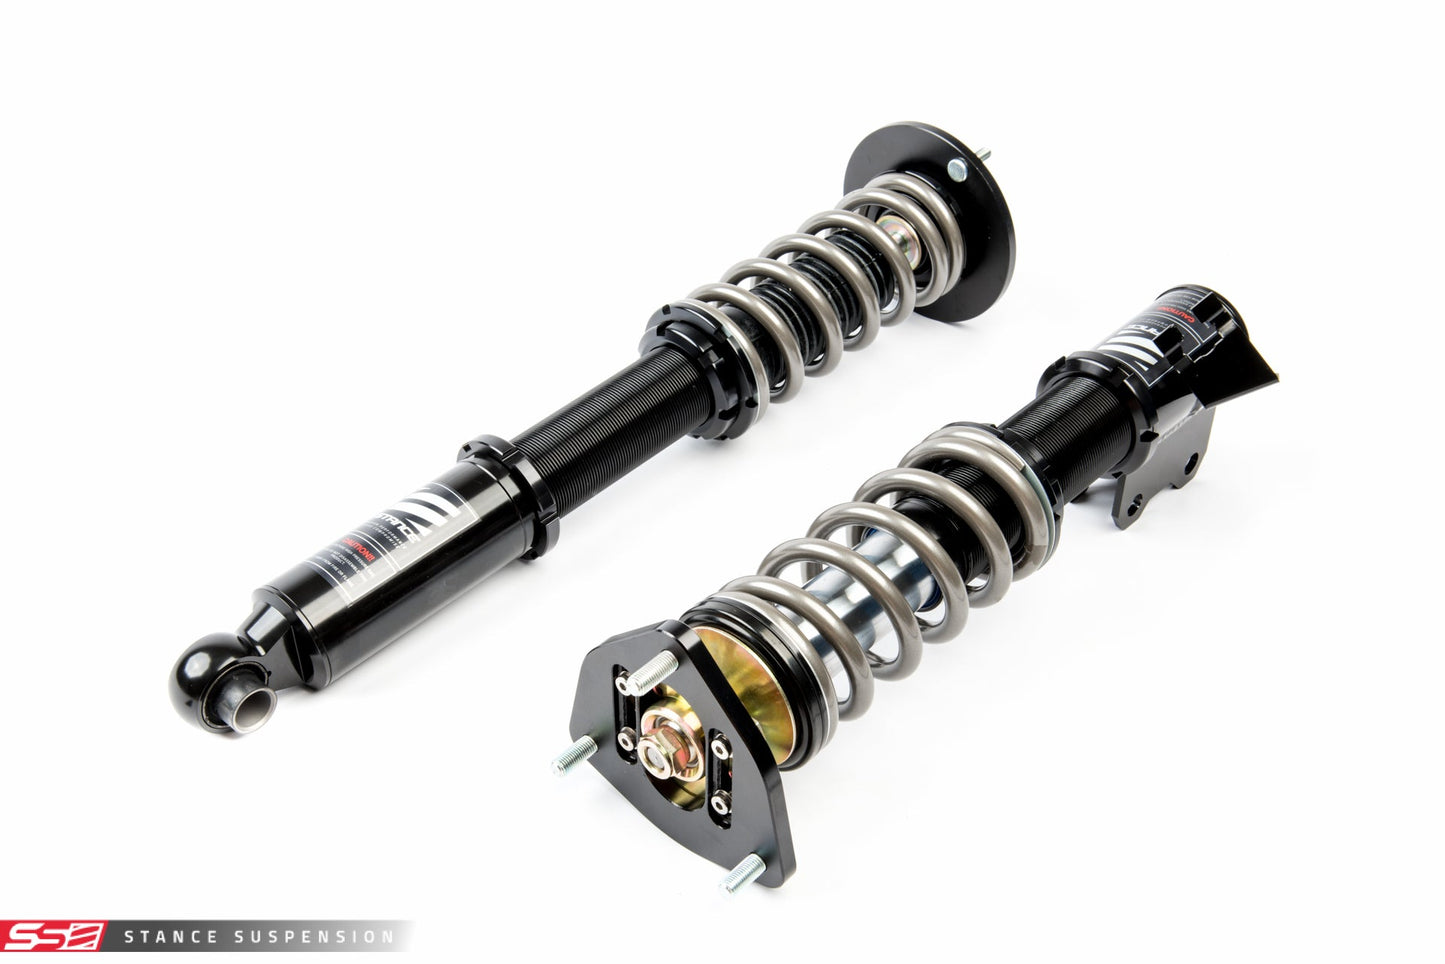 Stance Suspension - XR1 Coilovers for 99+ Nissan 240SX S15 (ST-S15-XR1)